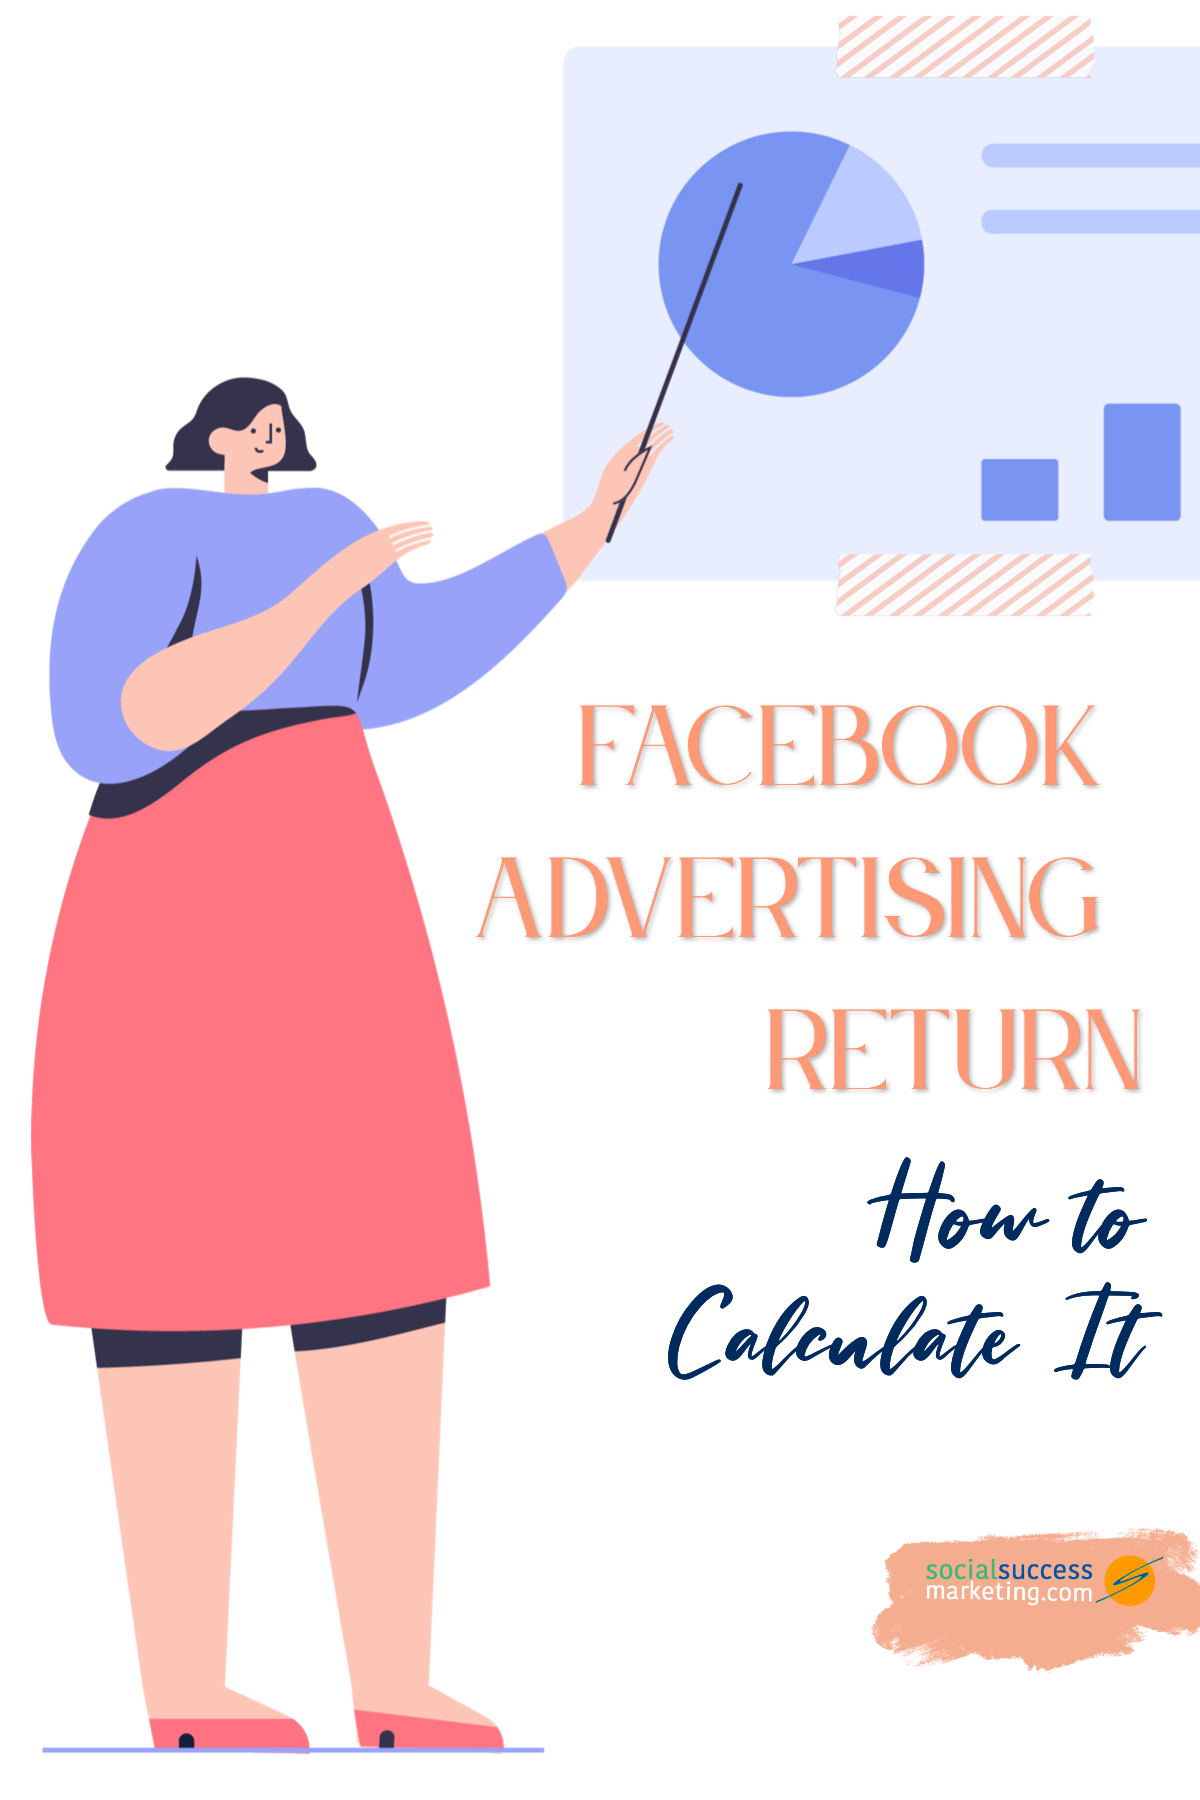 New to Facebook Advertising: Here’s What You Need to Know